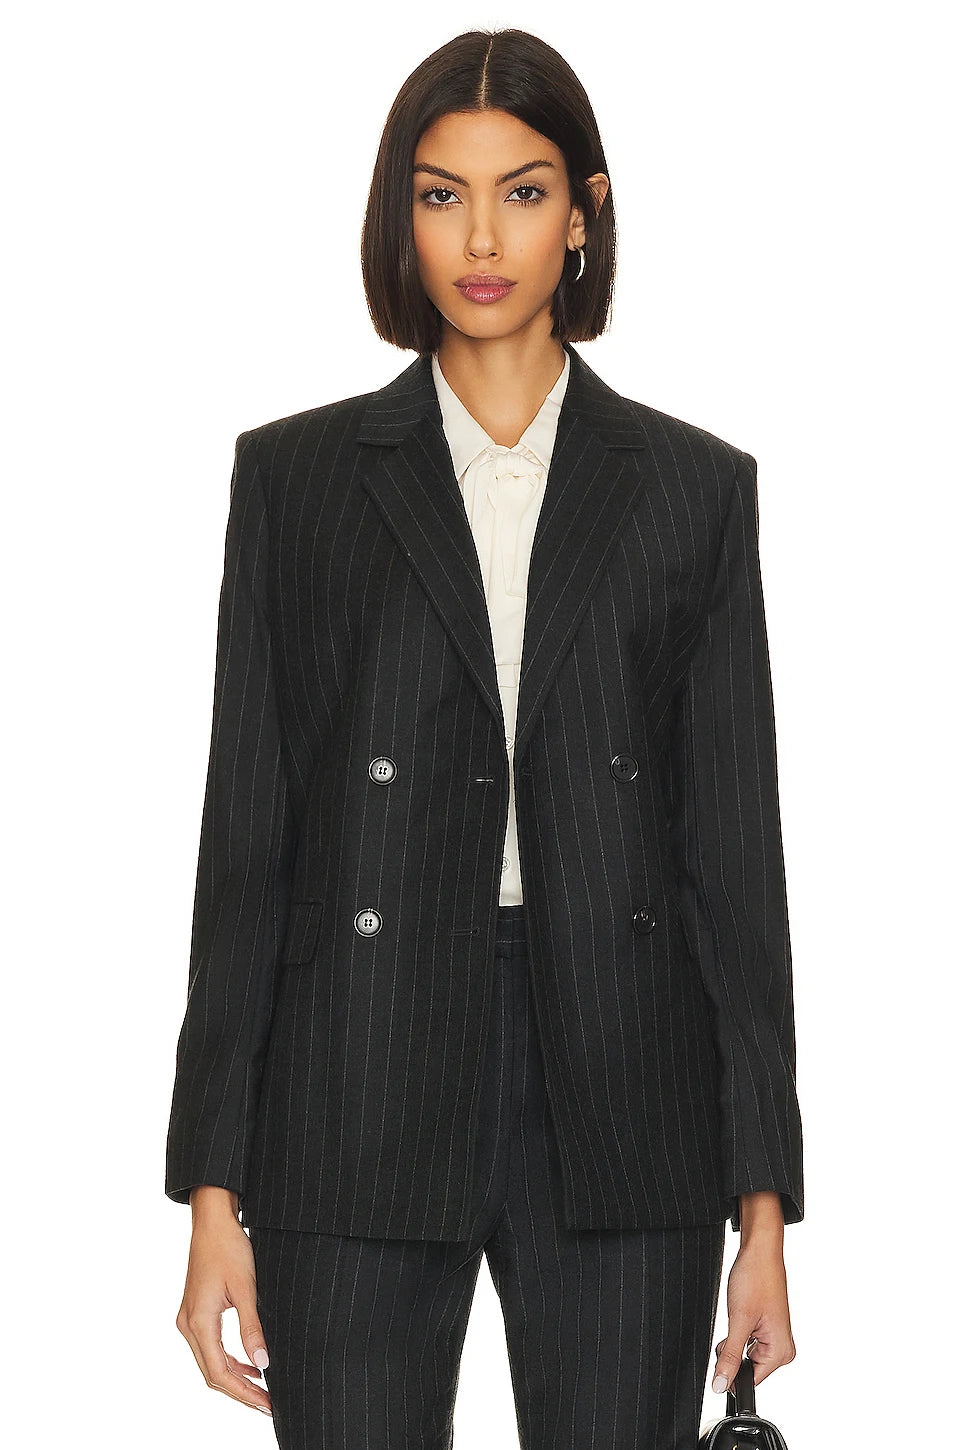 Step up your professional style with the Ensemble Mathilda—a business suit jacket and pants combo designed to take on the commute with style and attitude. Feel confident, empowered, and ready to tackle the day with this bold two-piece made to inspire.